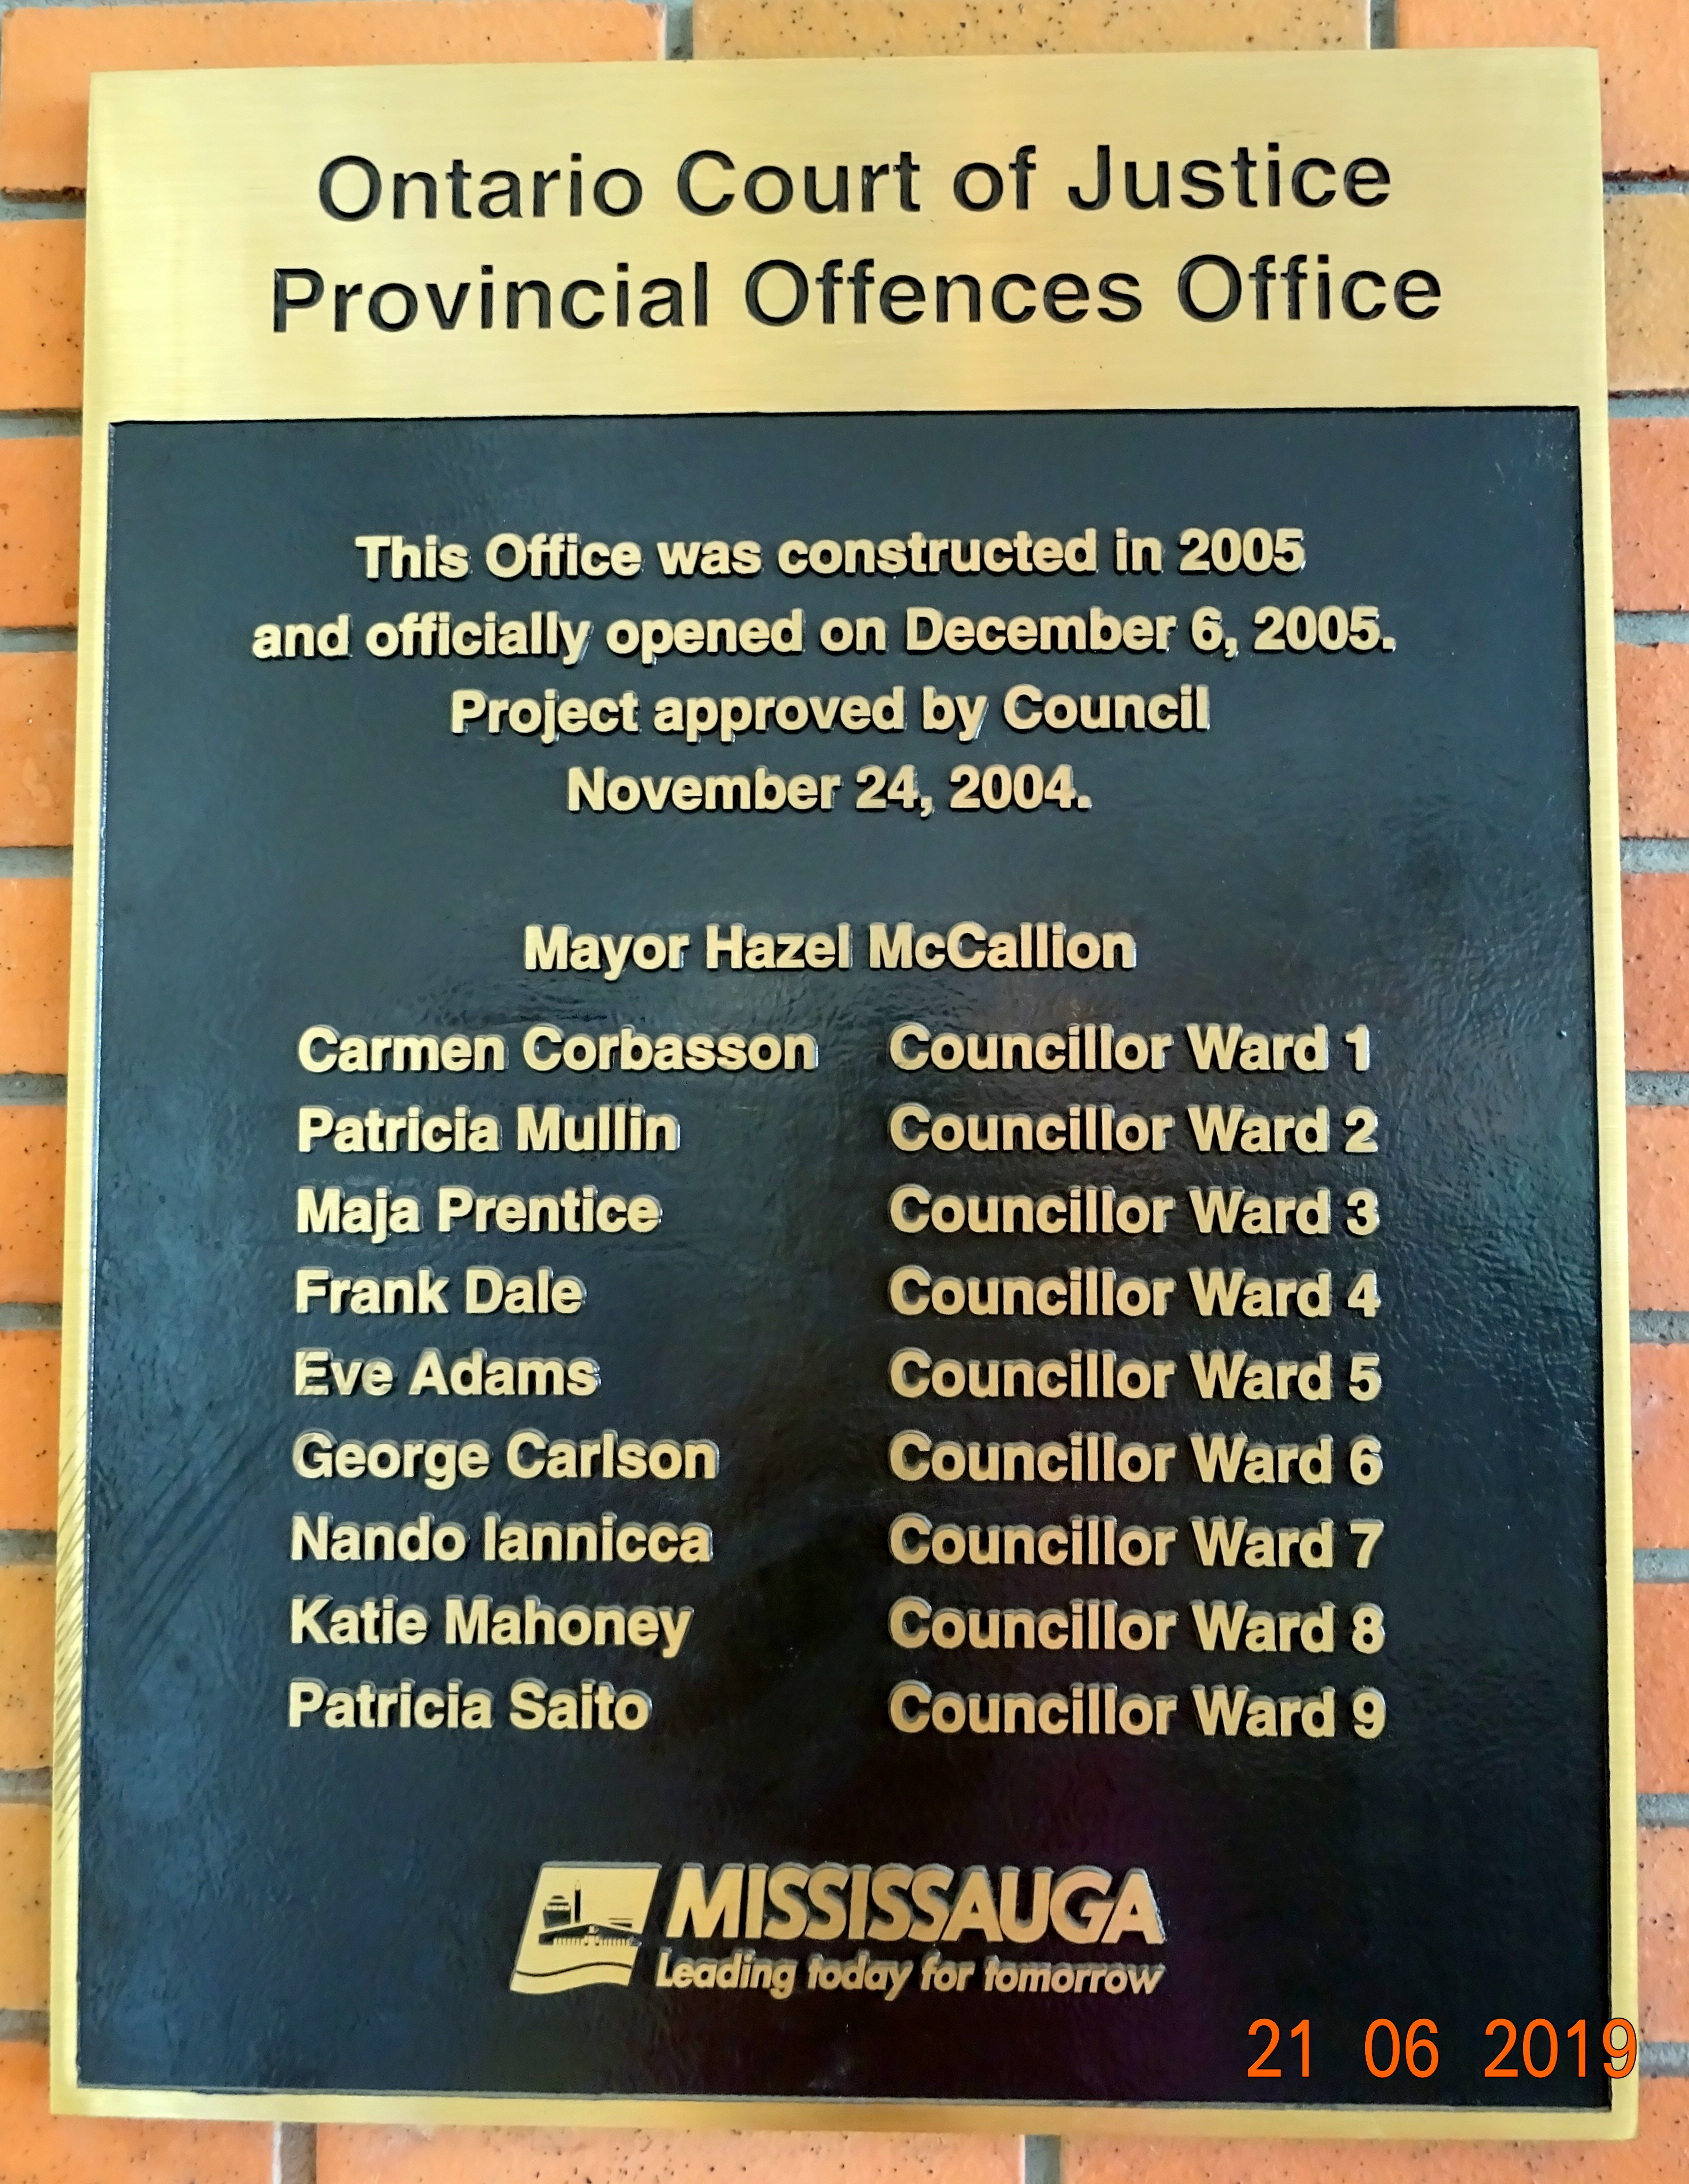 Ontario Court of Justice Provincial Offences Office Opened by Mayor Hazel McCallion on November 24, 2004 - Photo by I Lee, 21 June 2019